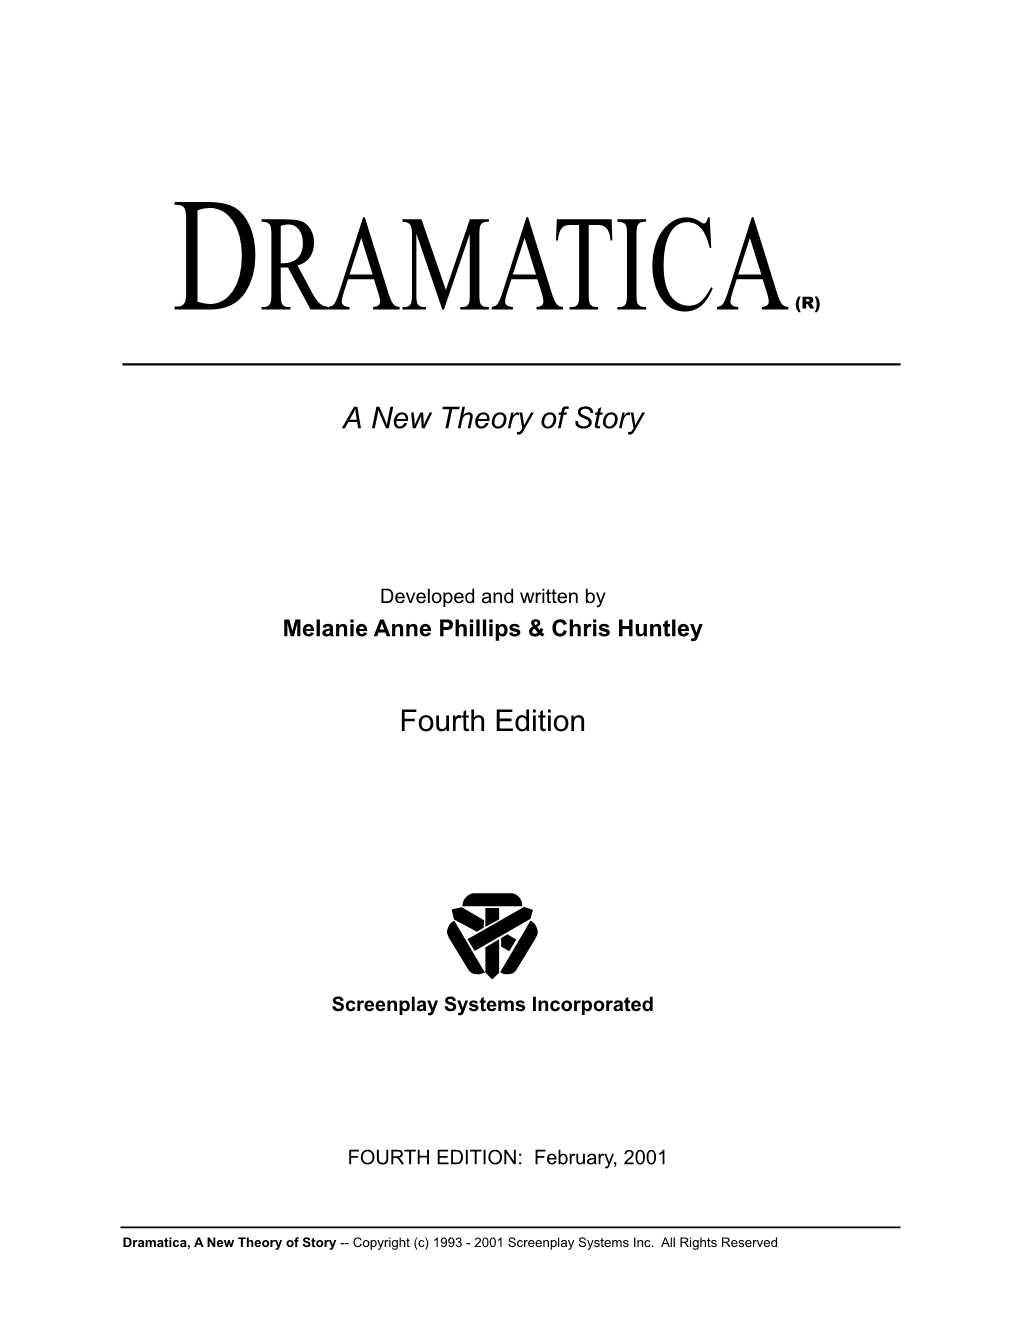 Dramatica, a New Theory of Story -- Copyright (C) 1993 - 2001 Screenplay Systems Inc